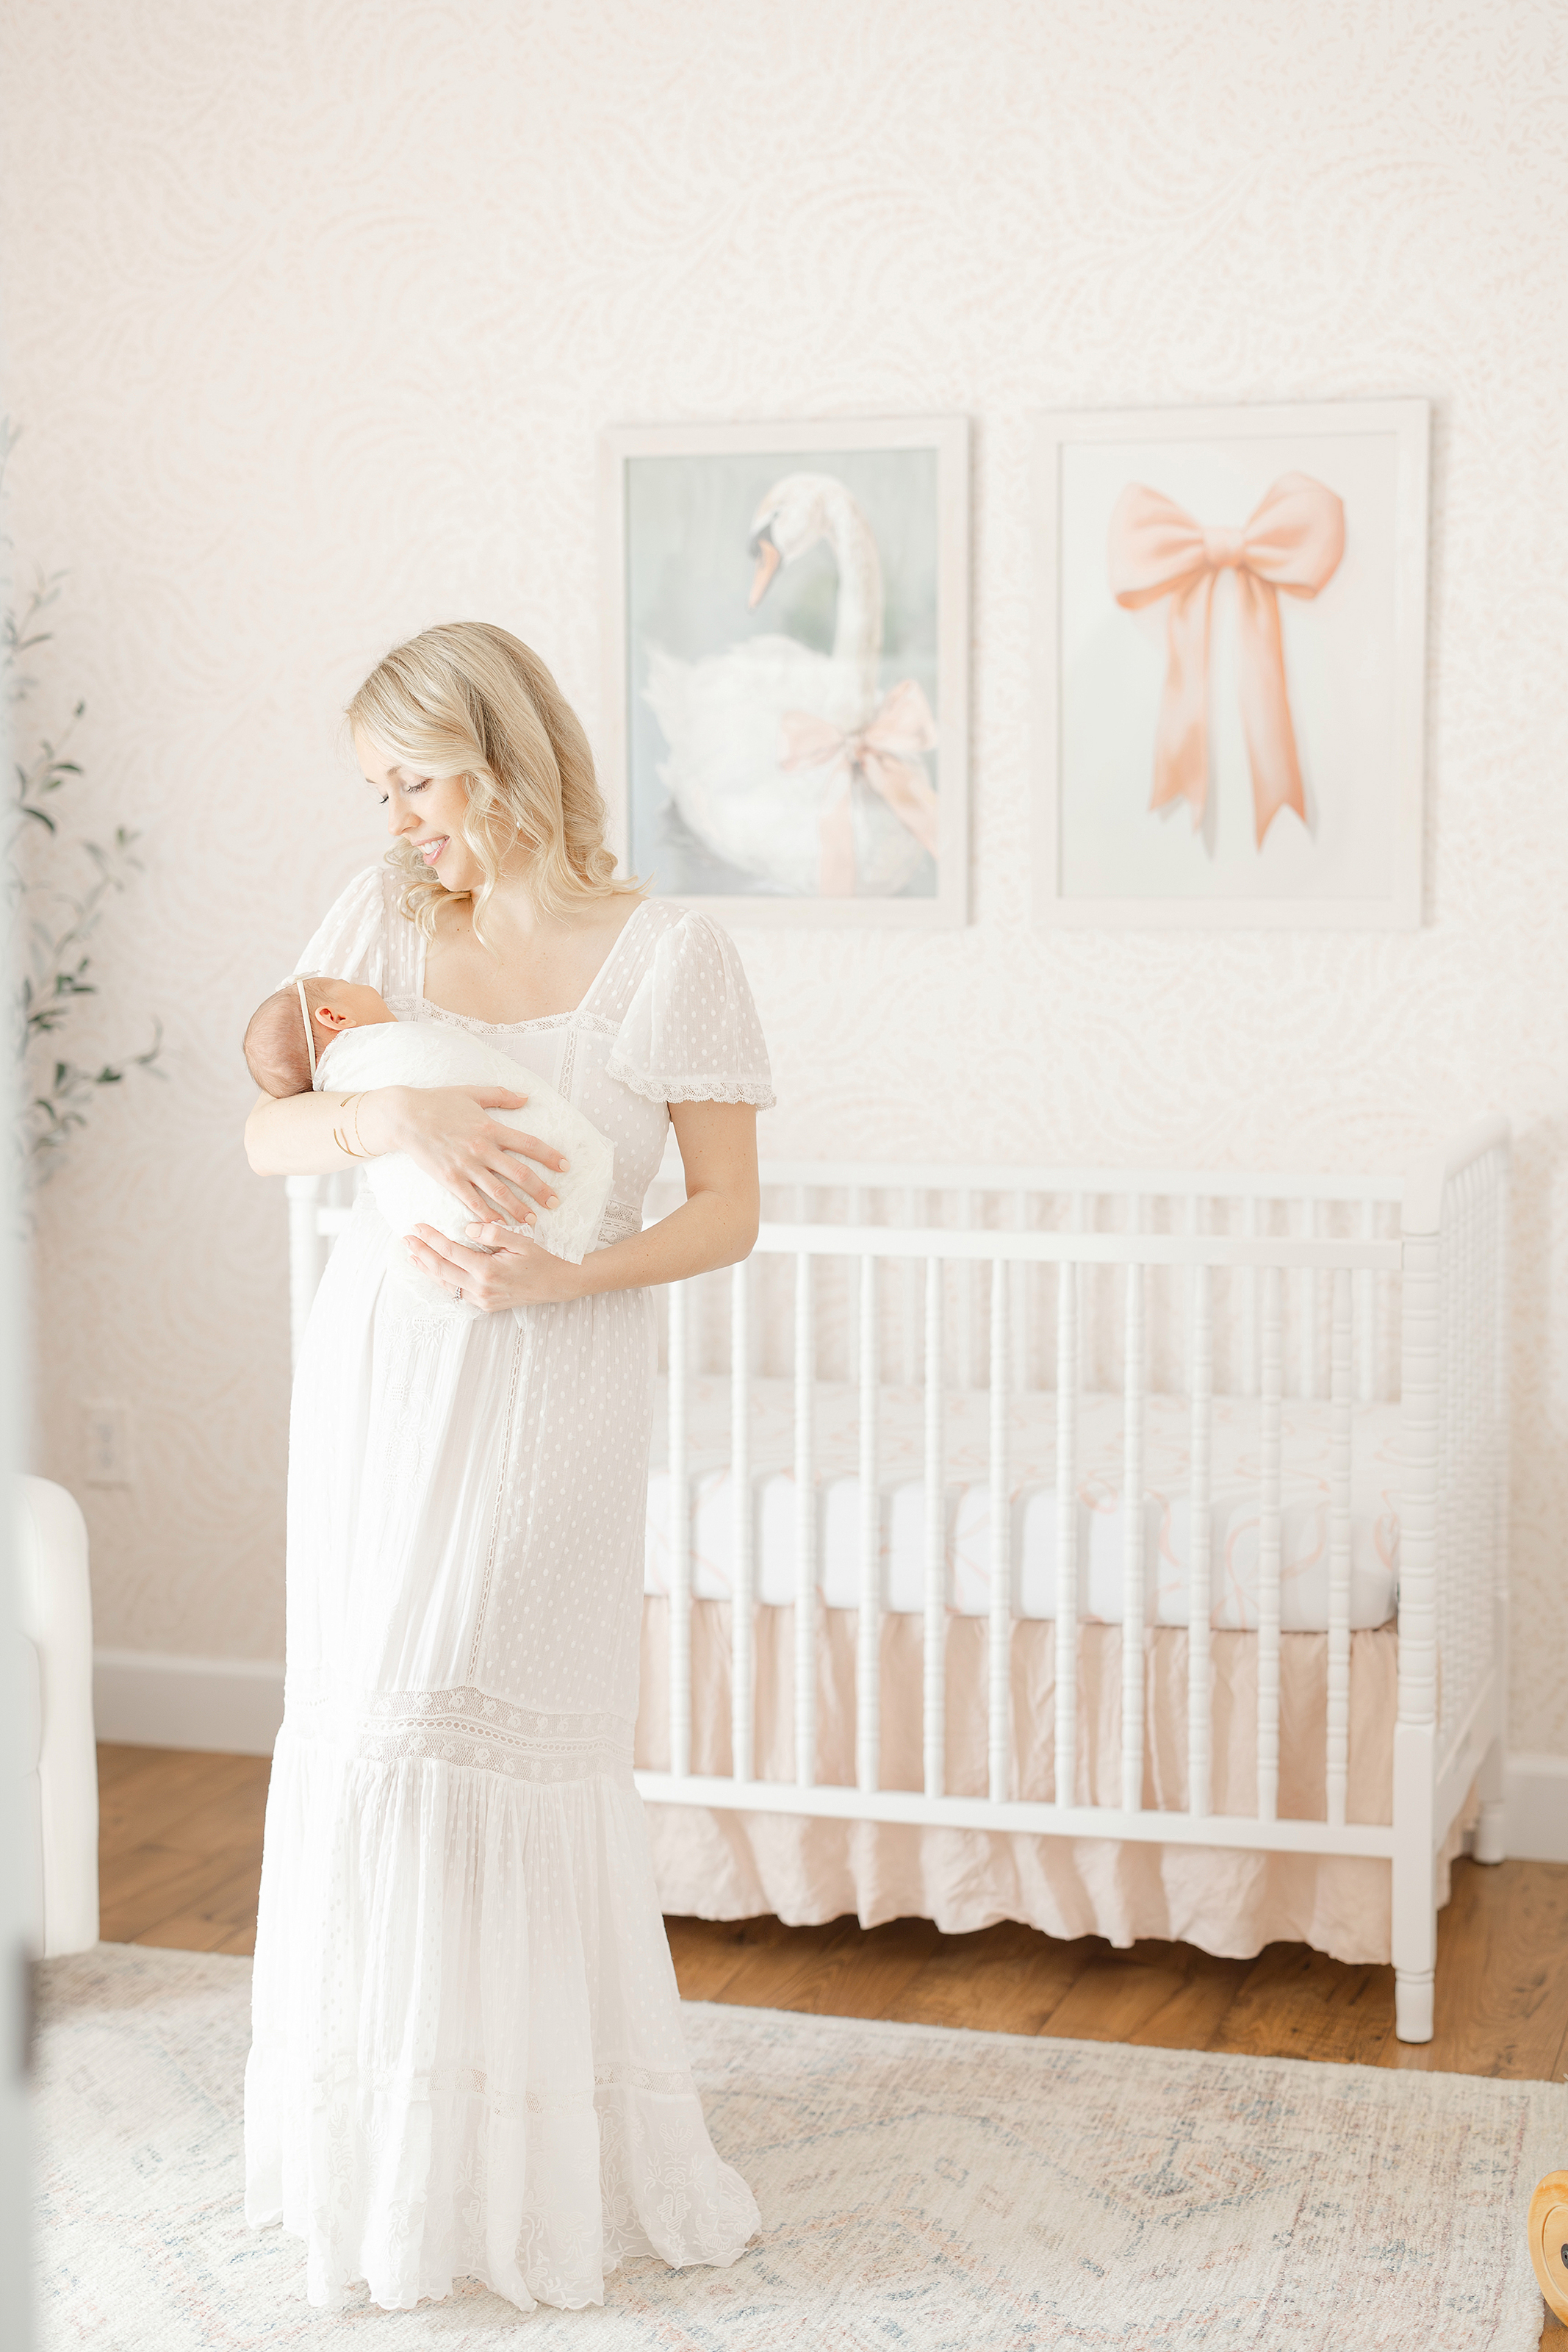 Blonde woman in white lace maxi dress holding a newborn baby girl in her nursery.